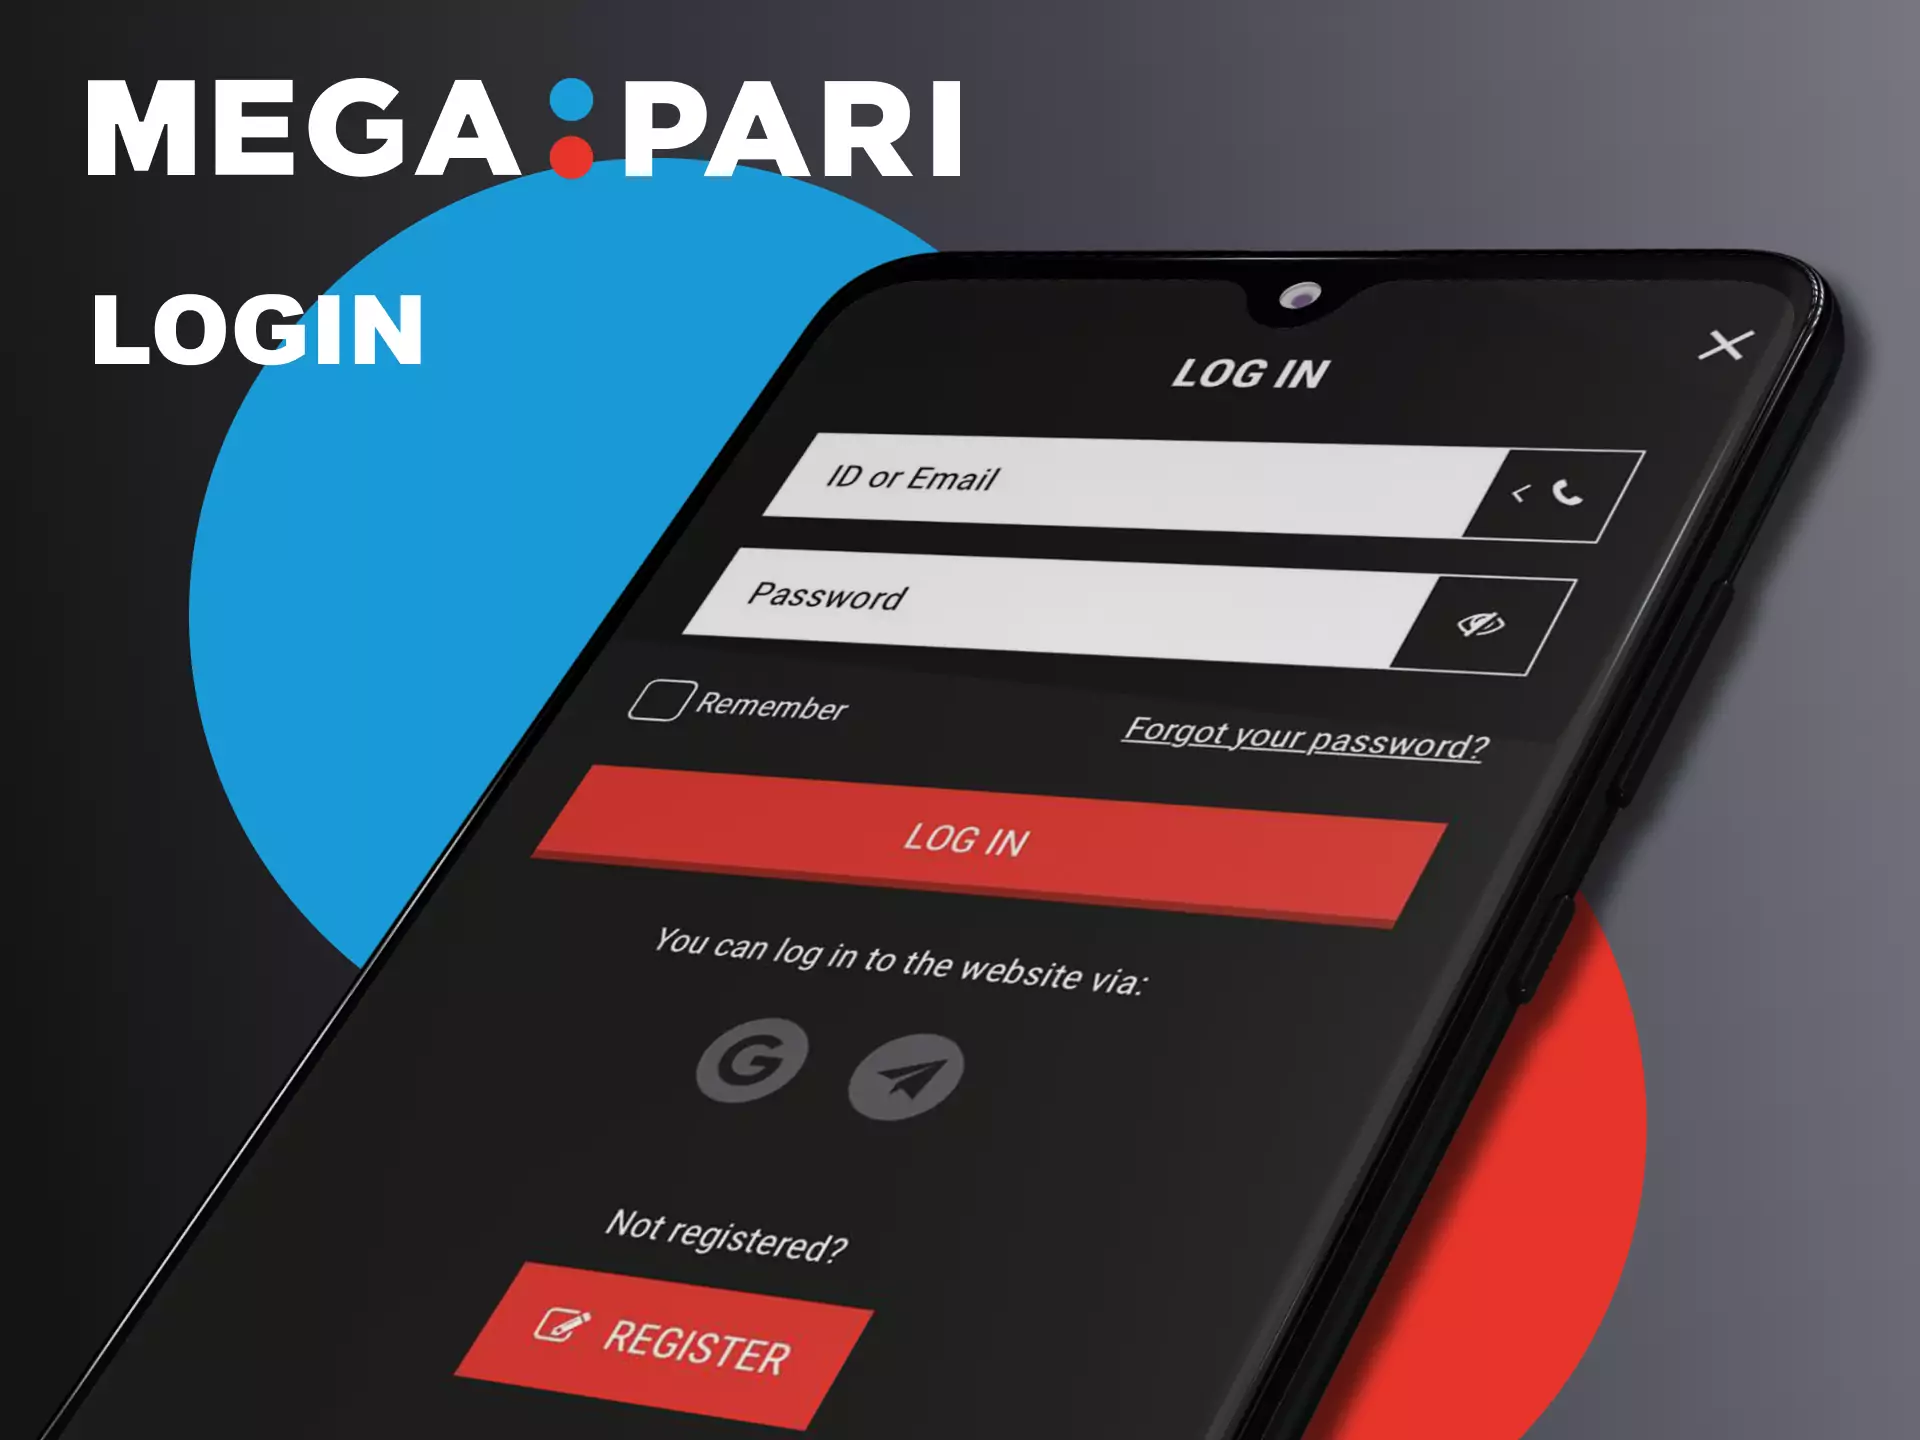 Login to your Megapari app account to play casino and sports betting.